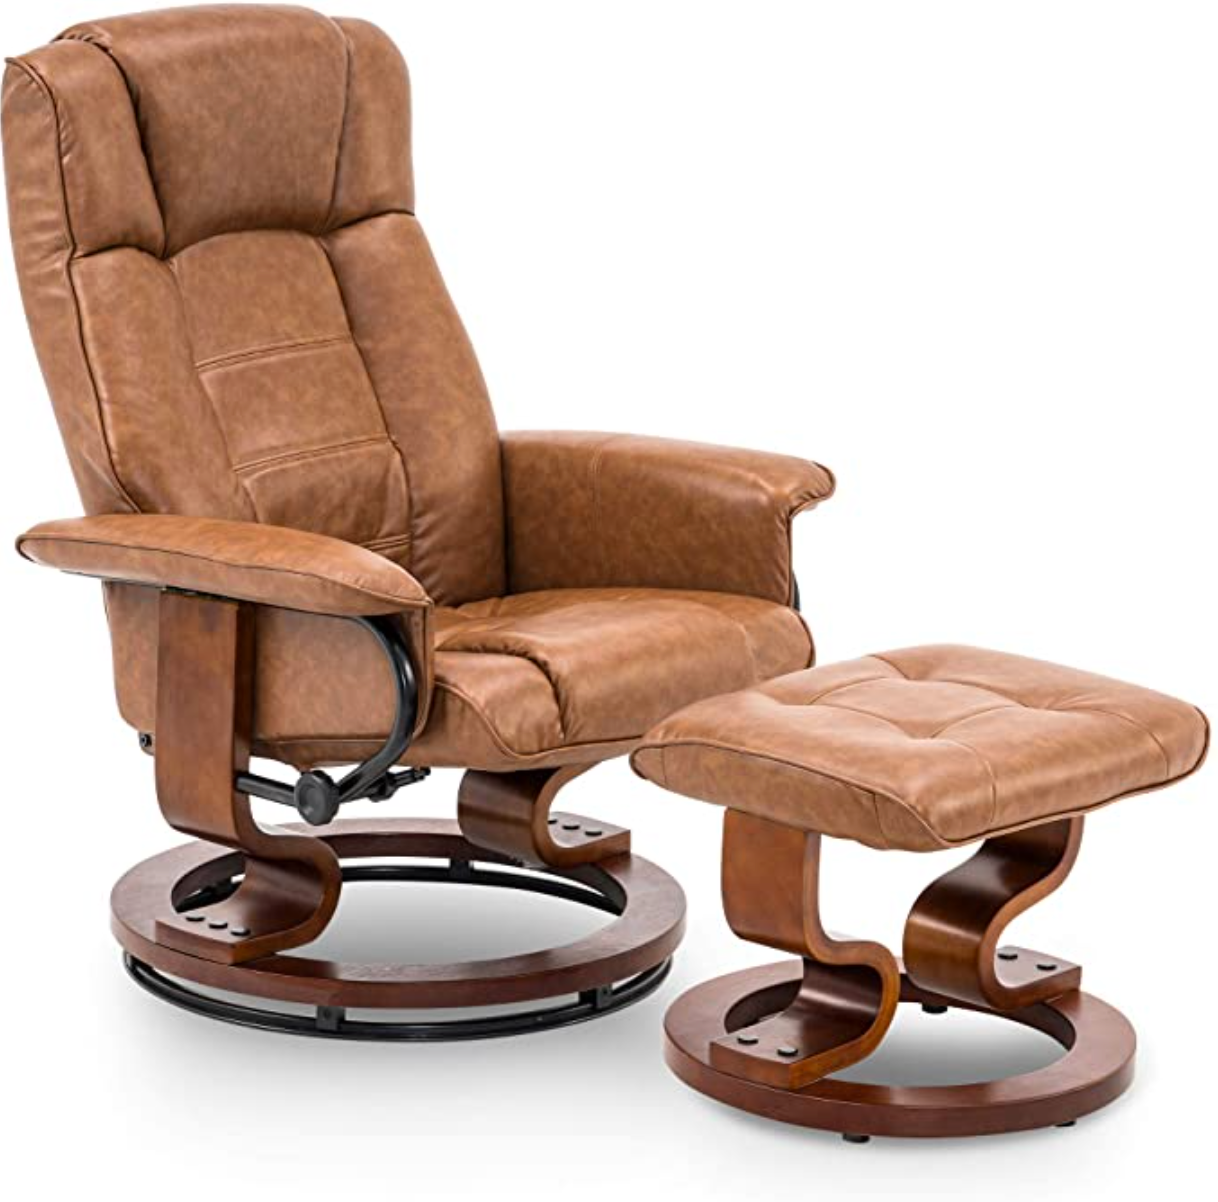 Mcombo Swiveling Recliner Chair with Wrapped Wood Base and Matching Ottoman Footrest